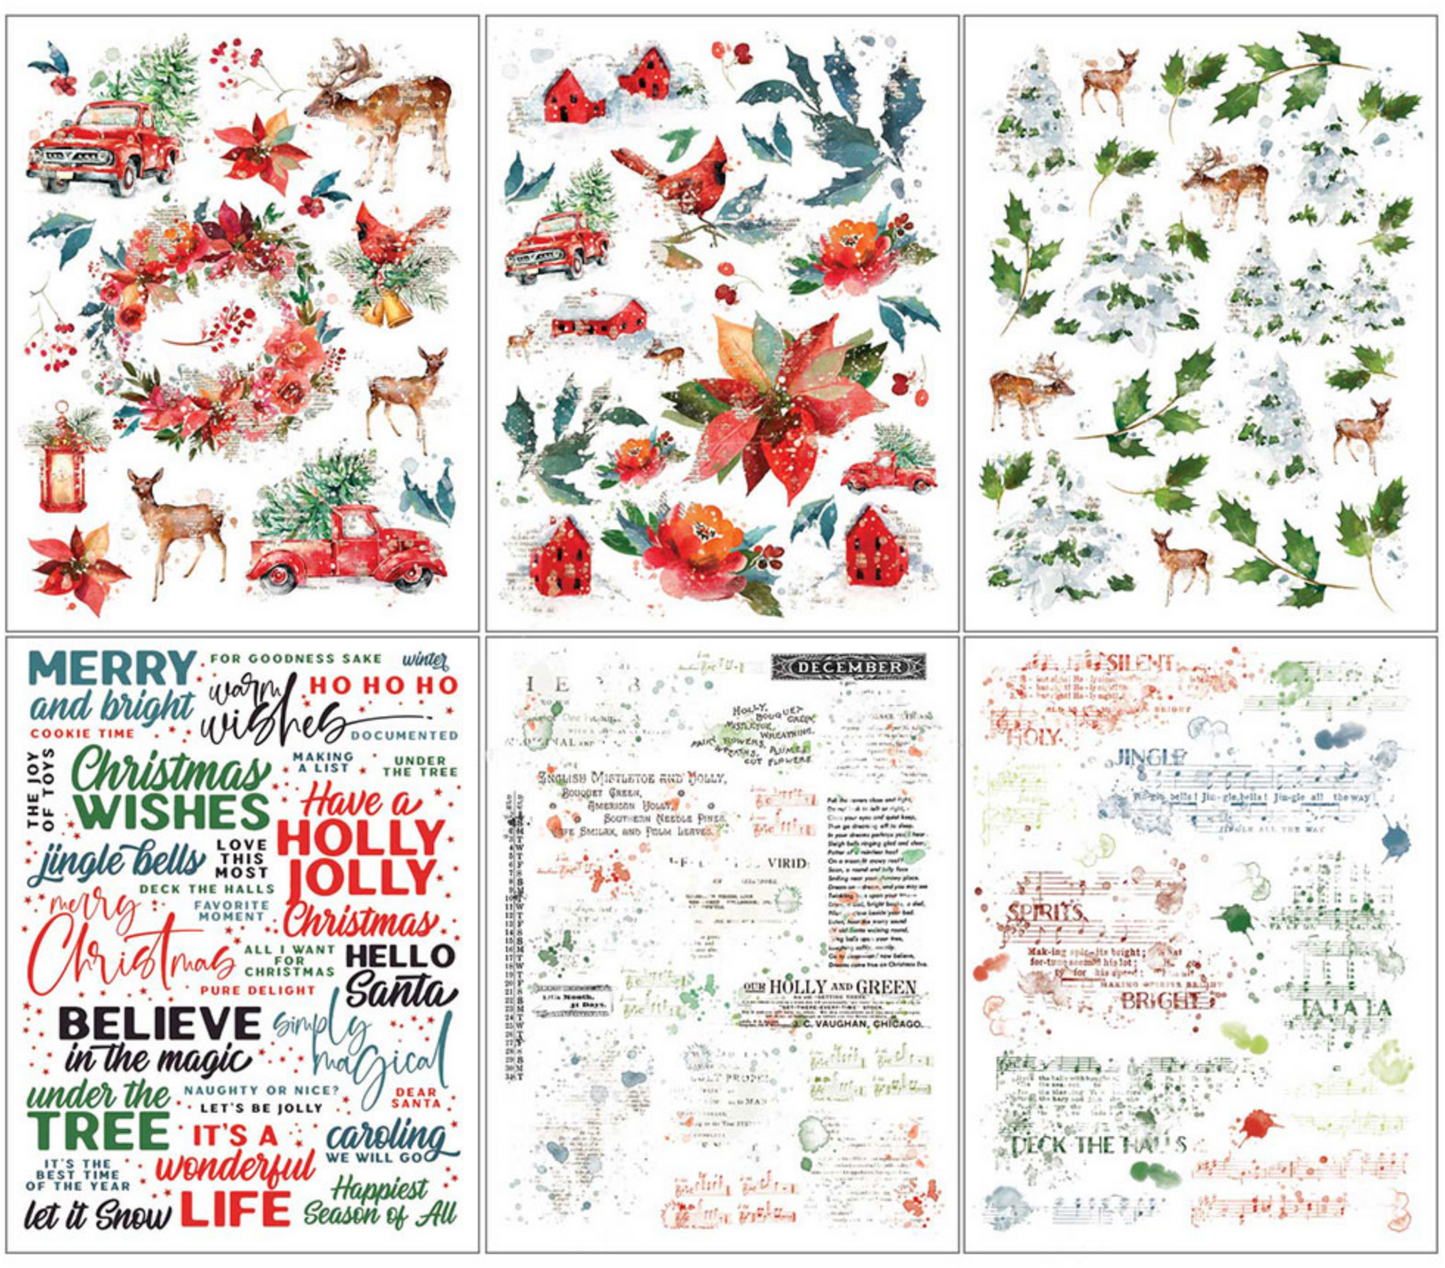 Rub-On Transfer Set - 6x8 Inch - 6 Sheets - Art Options Holiday Wishes - 49 And Market